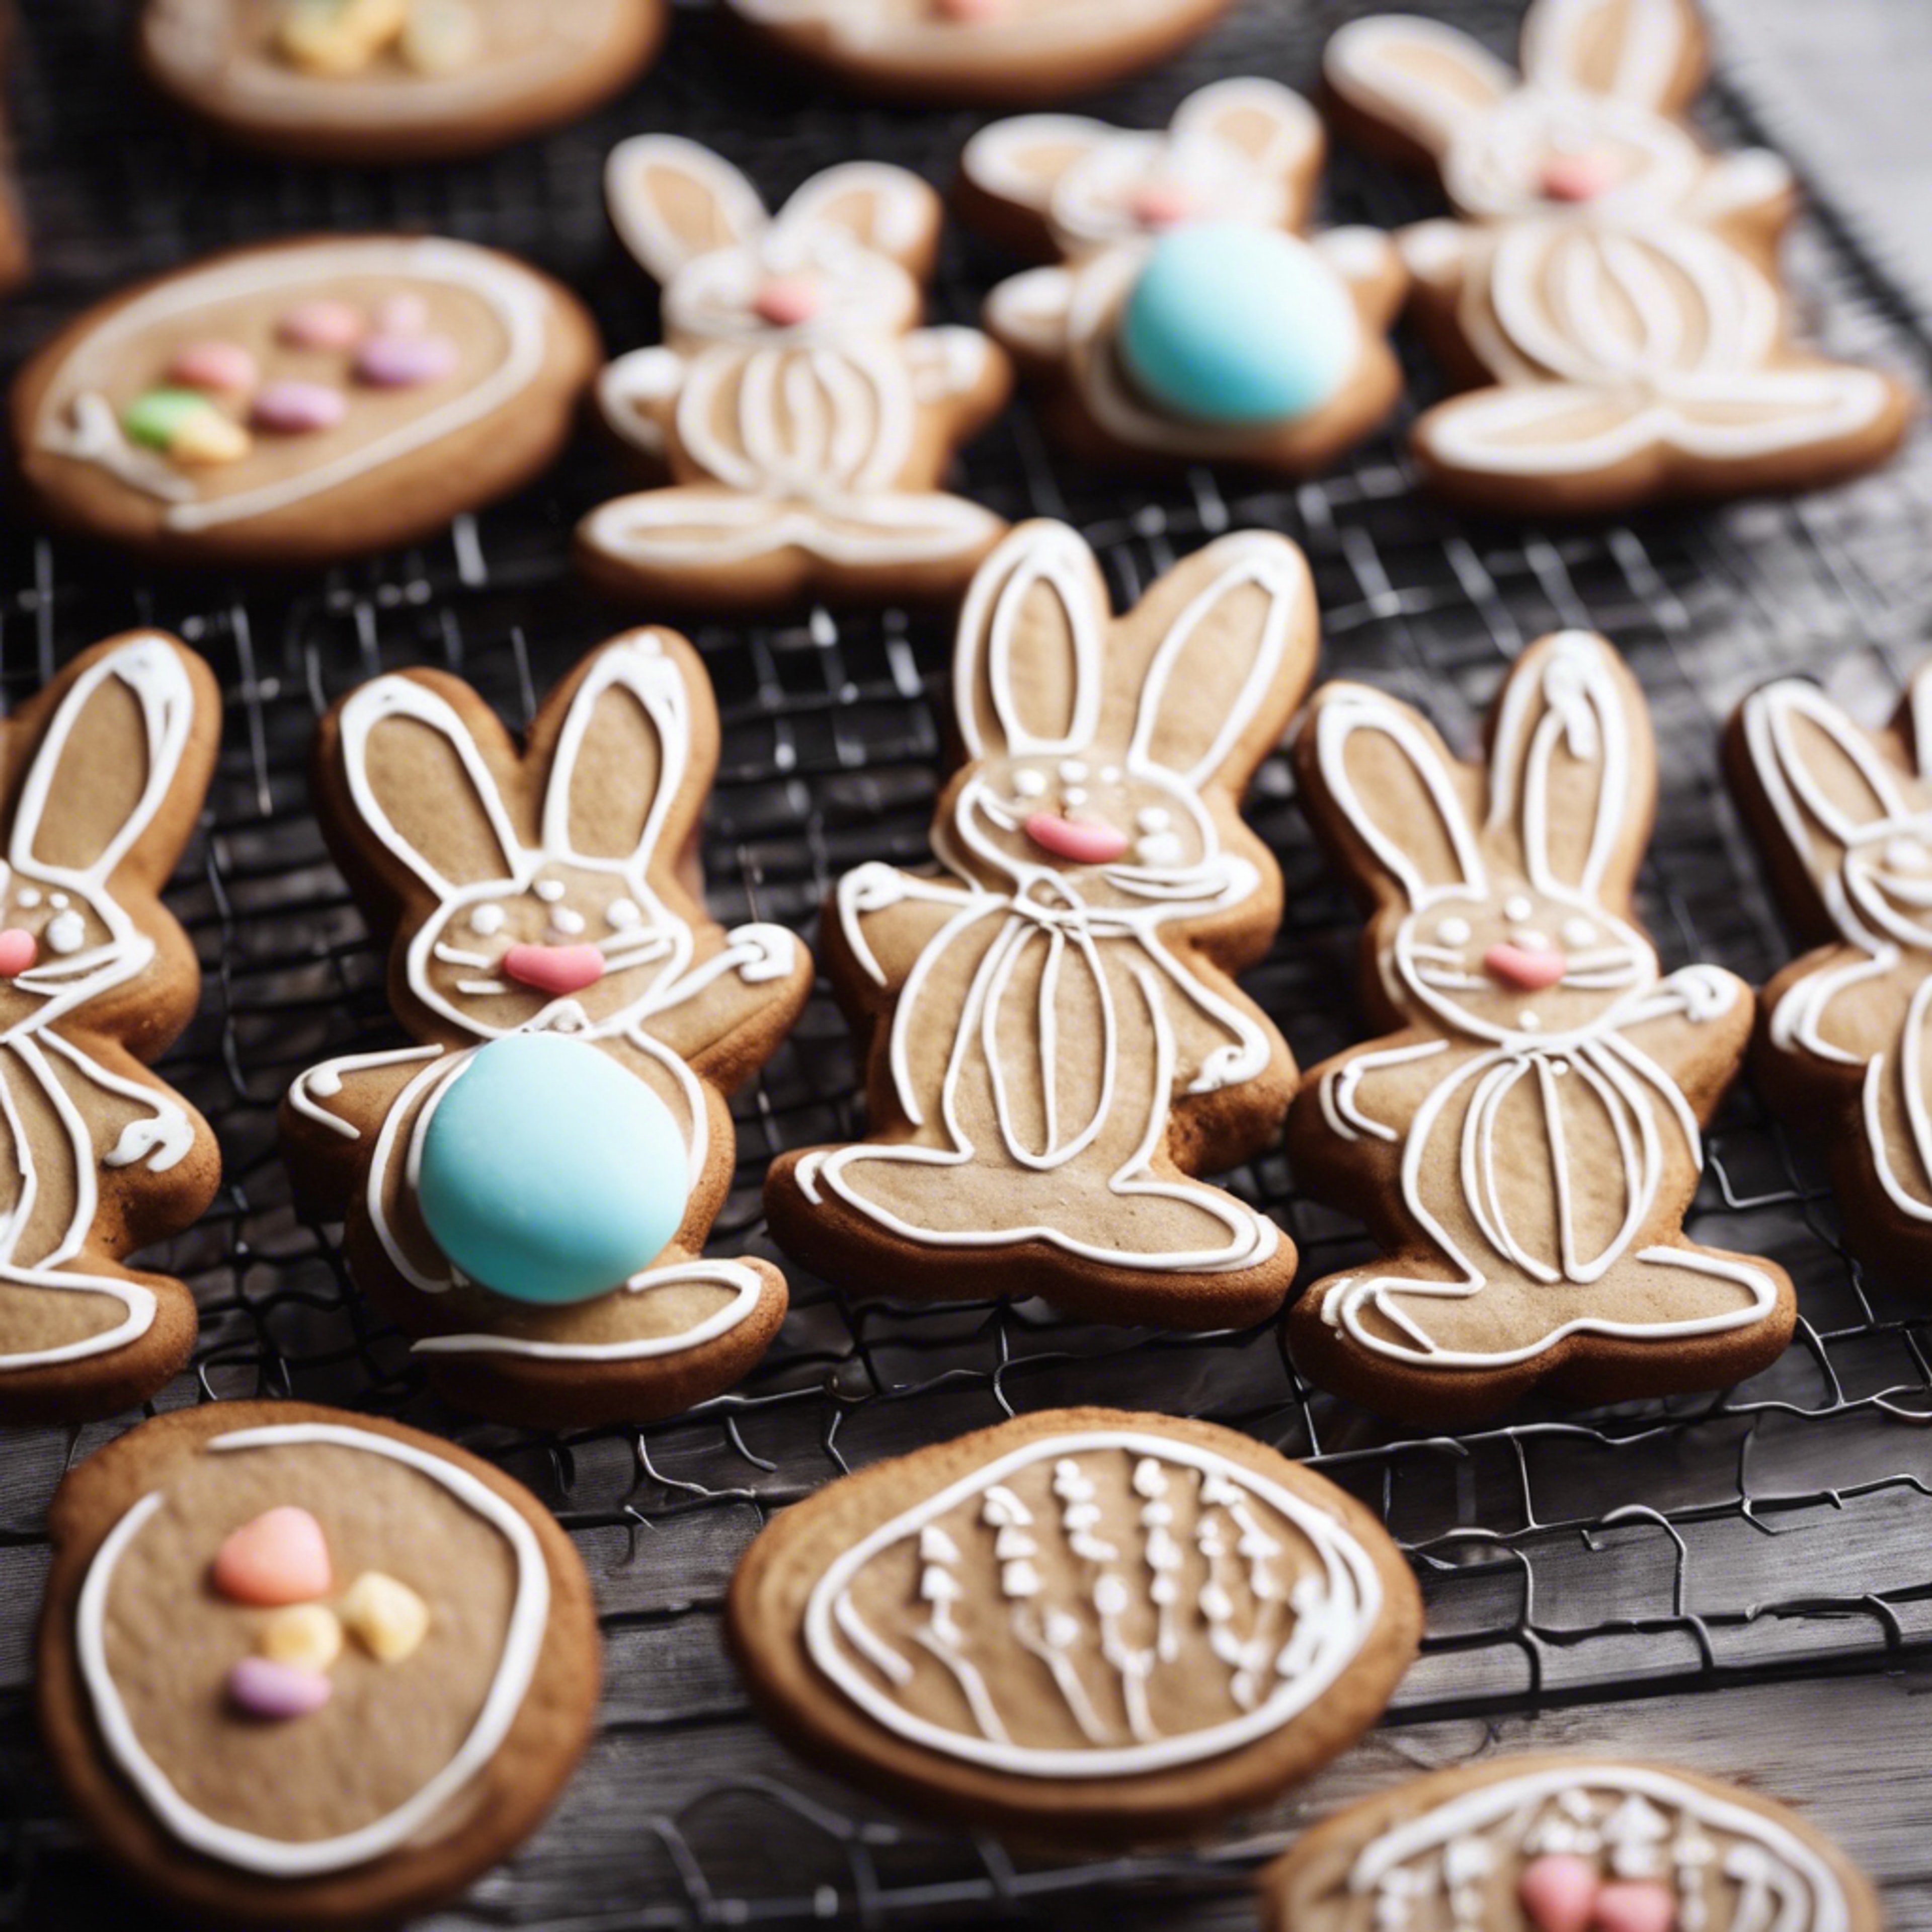 Homemade gingerbread cookies shaped like Easter bunnies and eggs, cooling on a rack. ورق الجدران[c62694eb033d400aa62f]